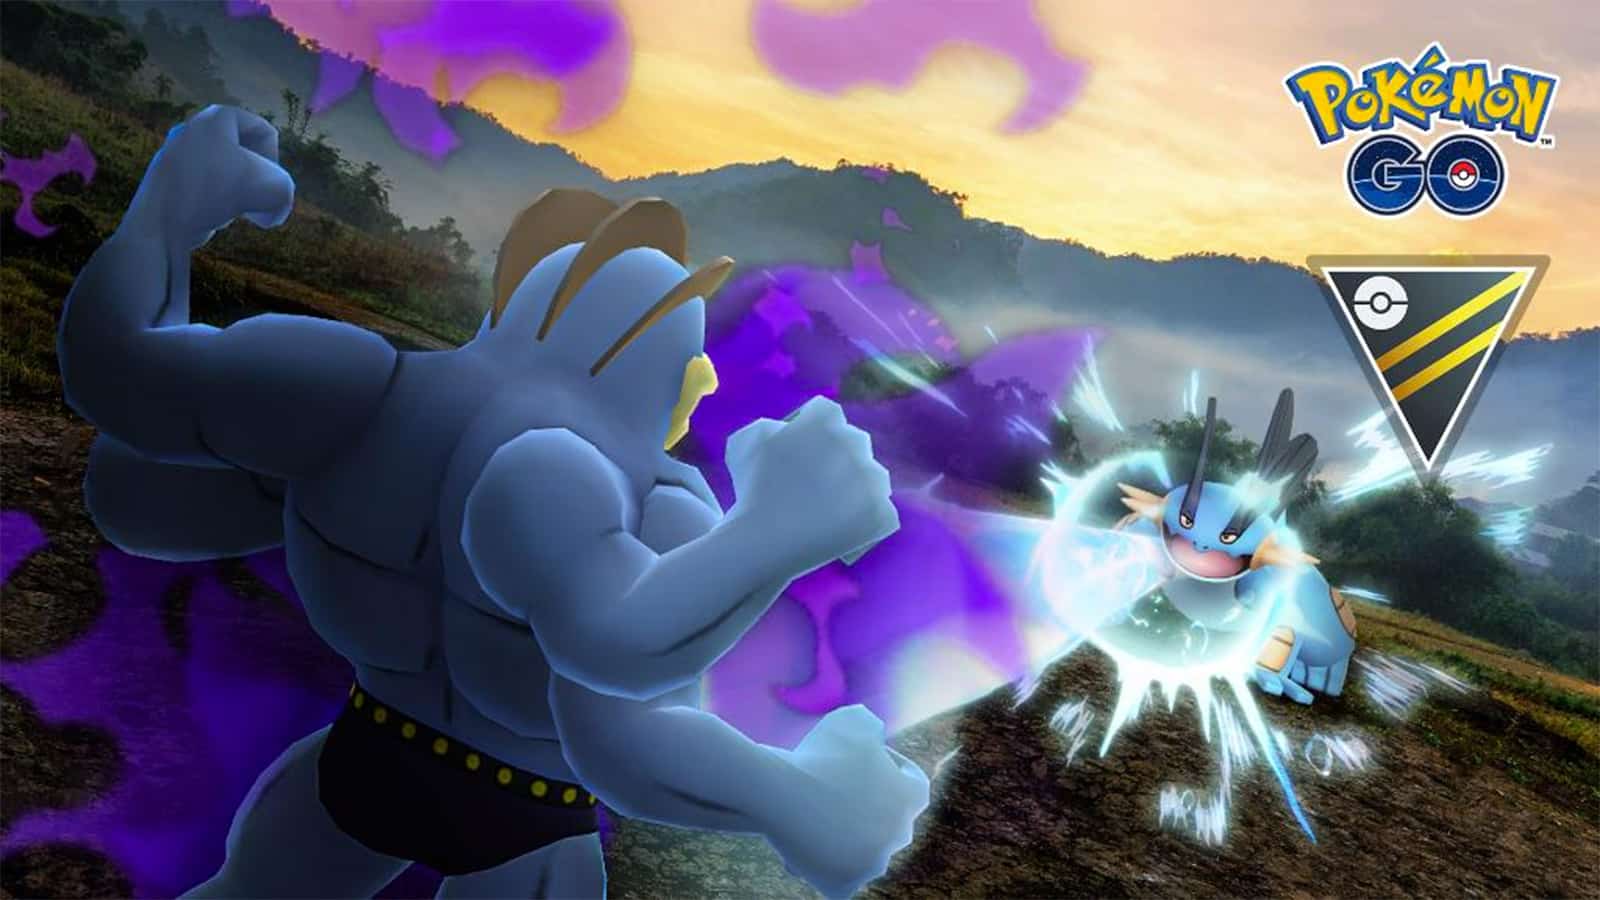 Machamp fighting Swampert in the Pokemon Go Ultra League Premier Classic cup